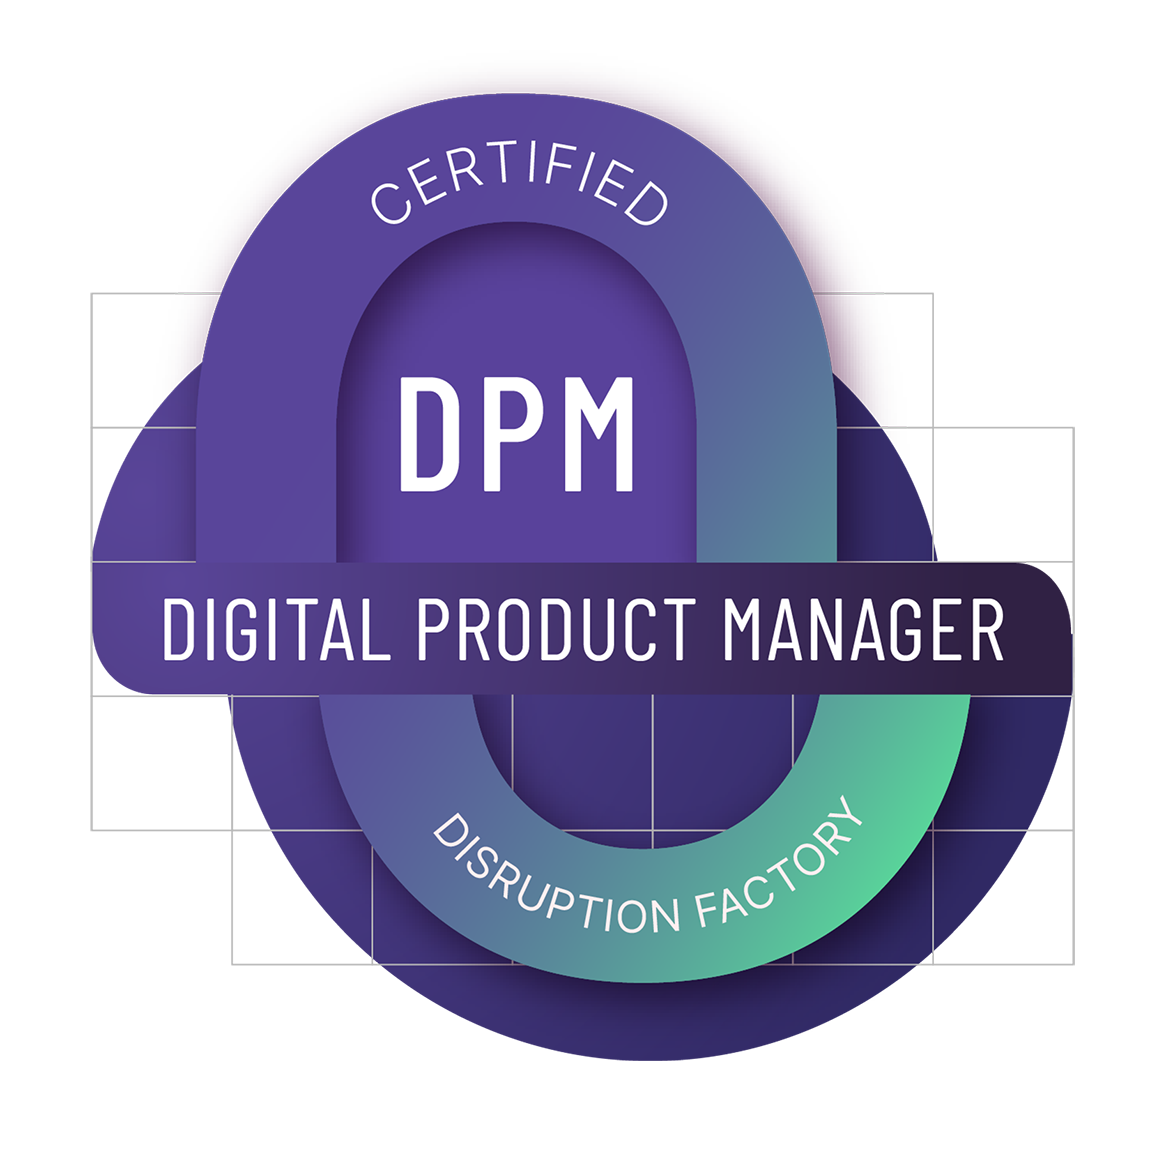 Certified Digital Product Manager (DPM)